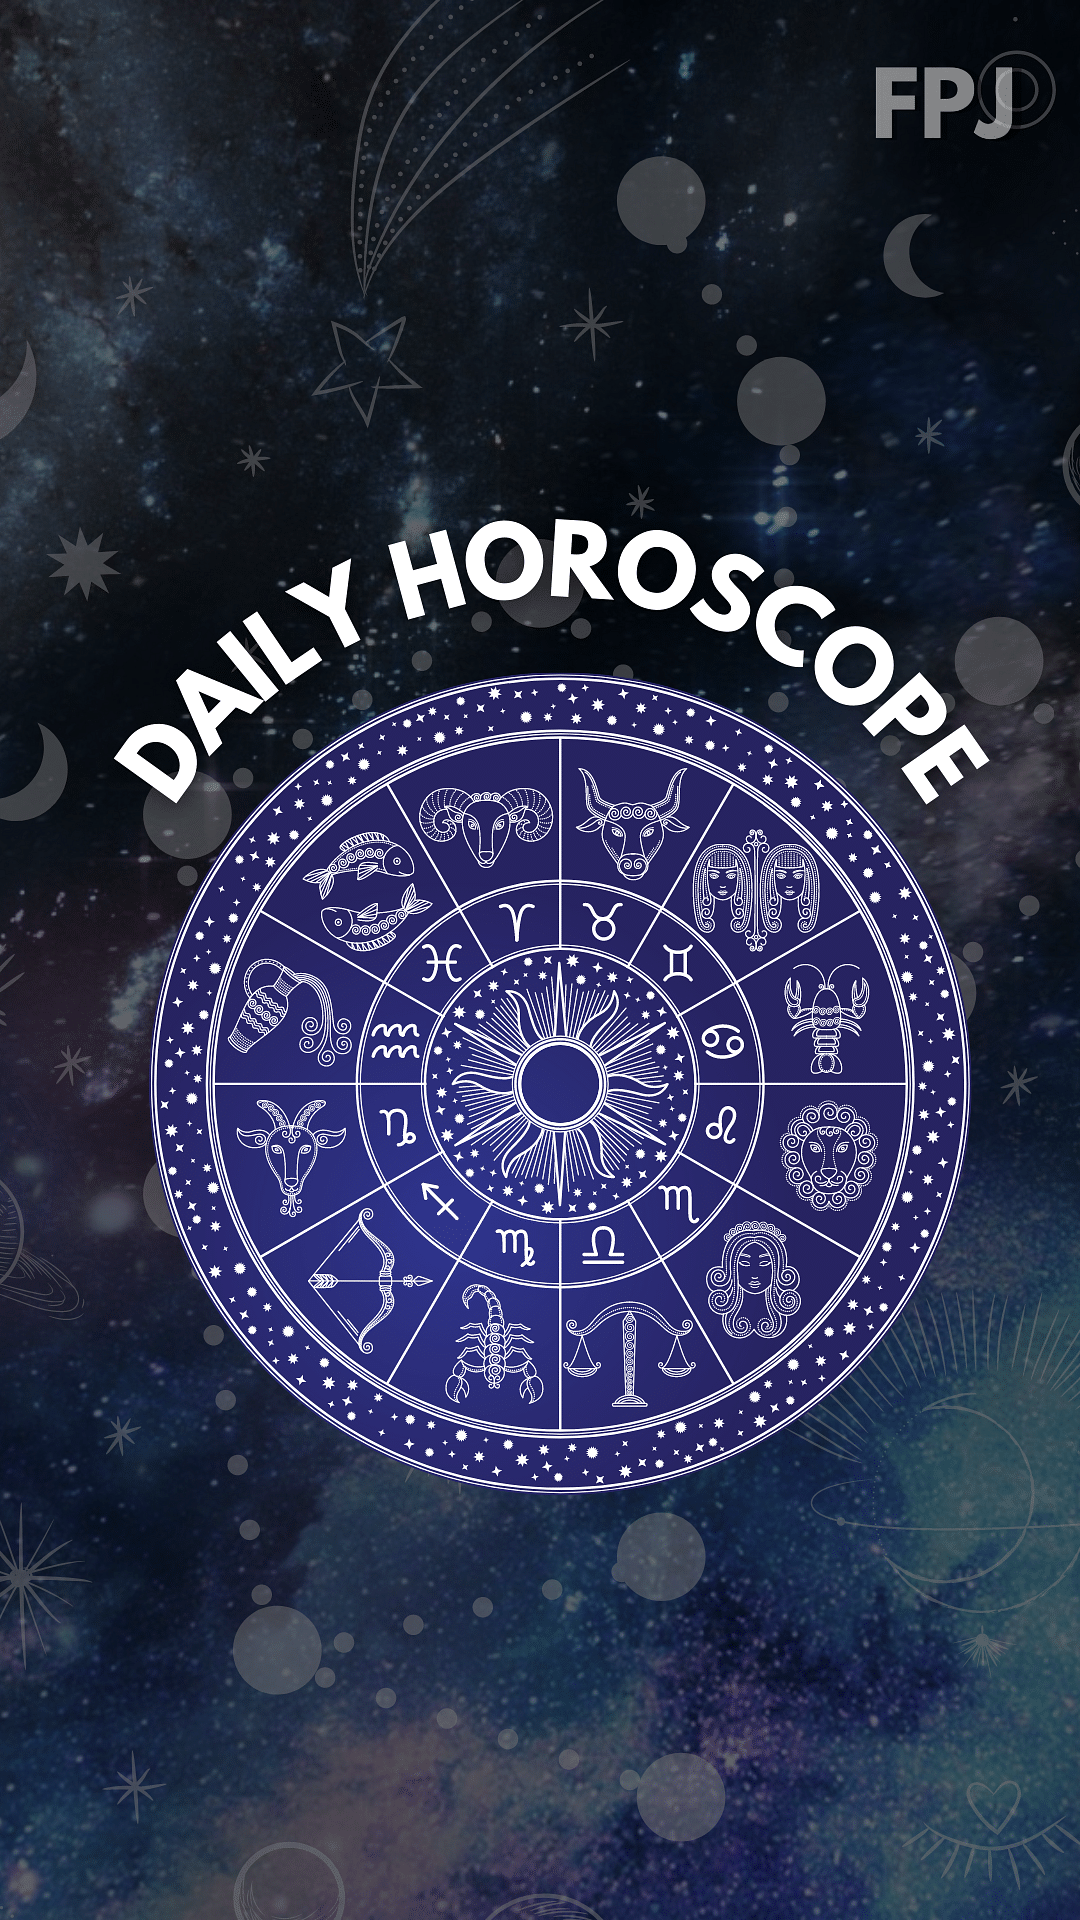 Daily Horoscope for 2021 - Predictions for all zodiac signs based on astrology and numerology. - Cancer